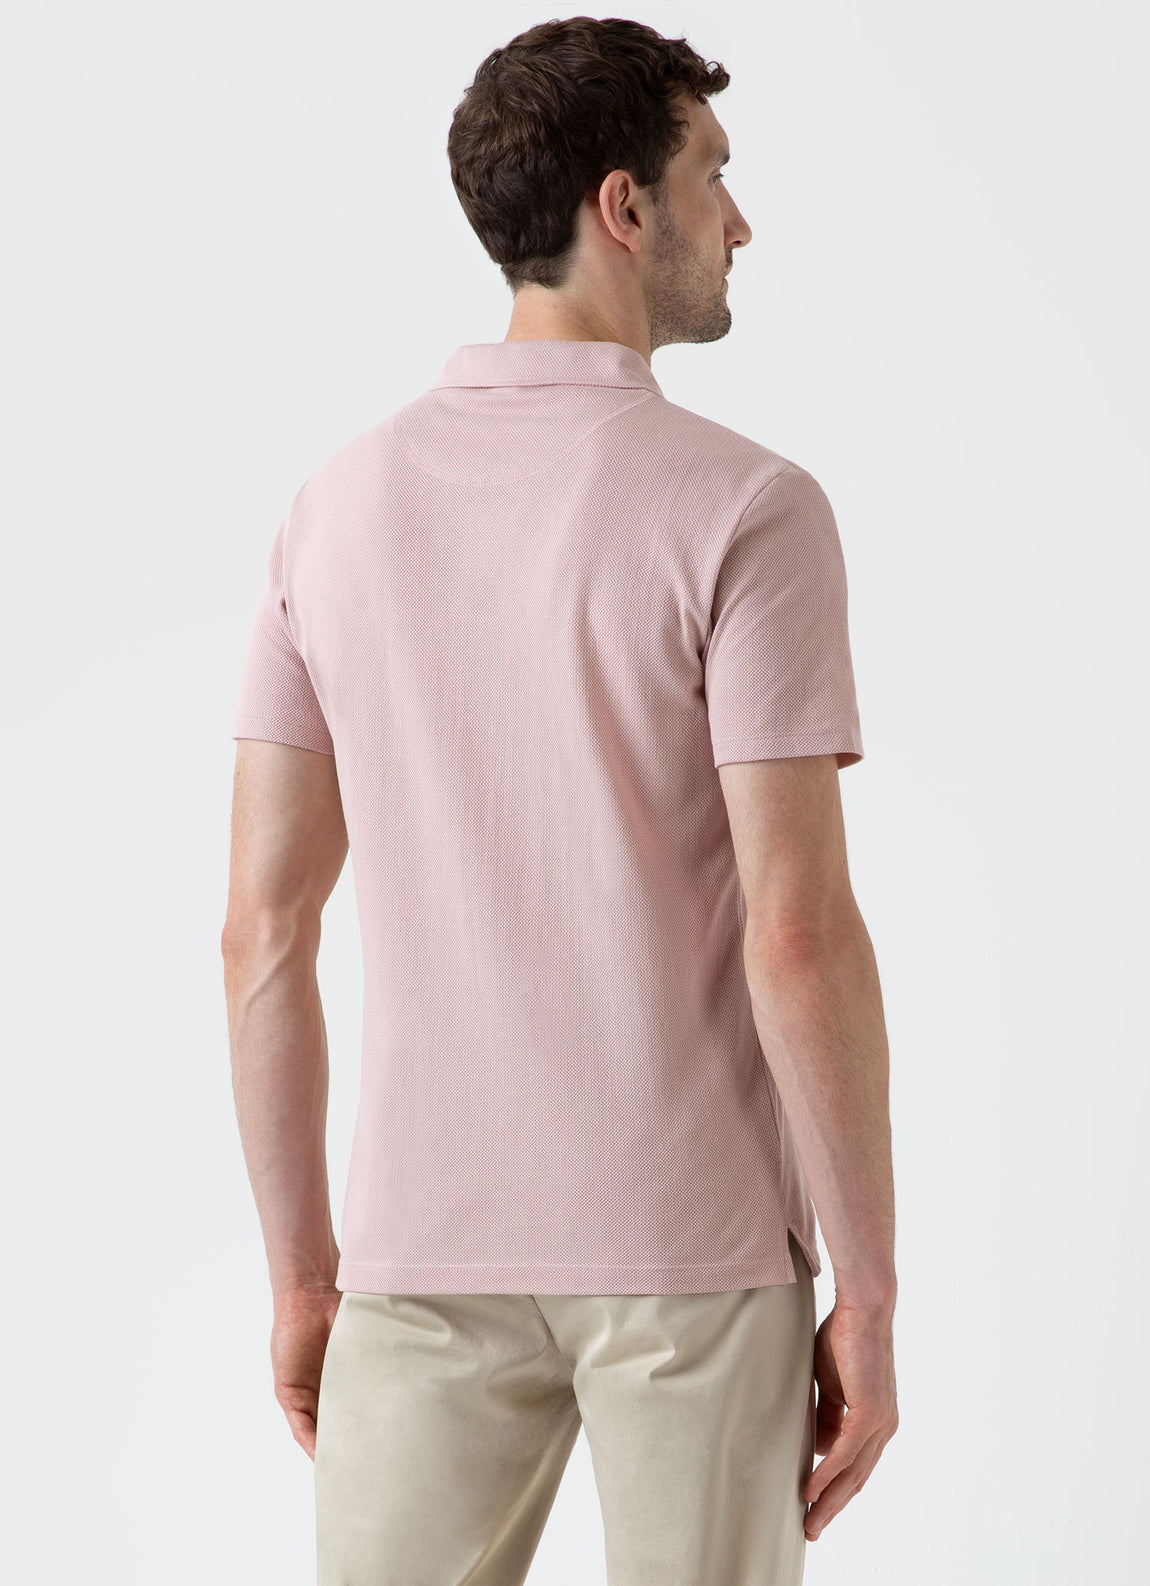 Men's Riviera Polo Shirt in Pale Pink